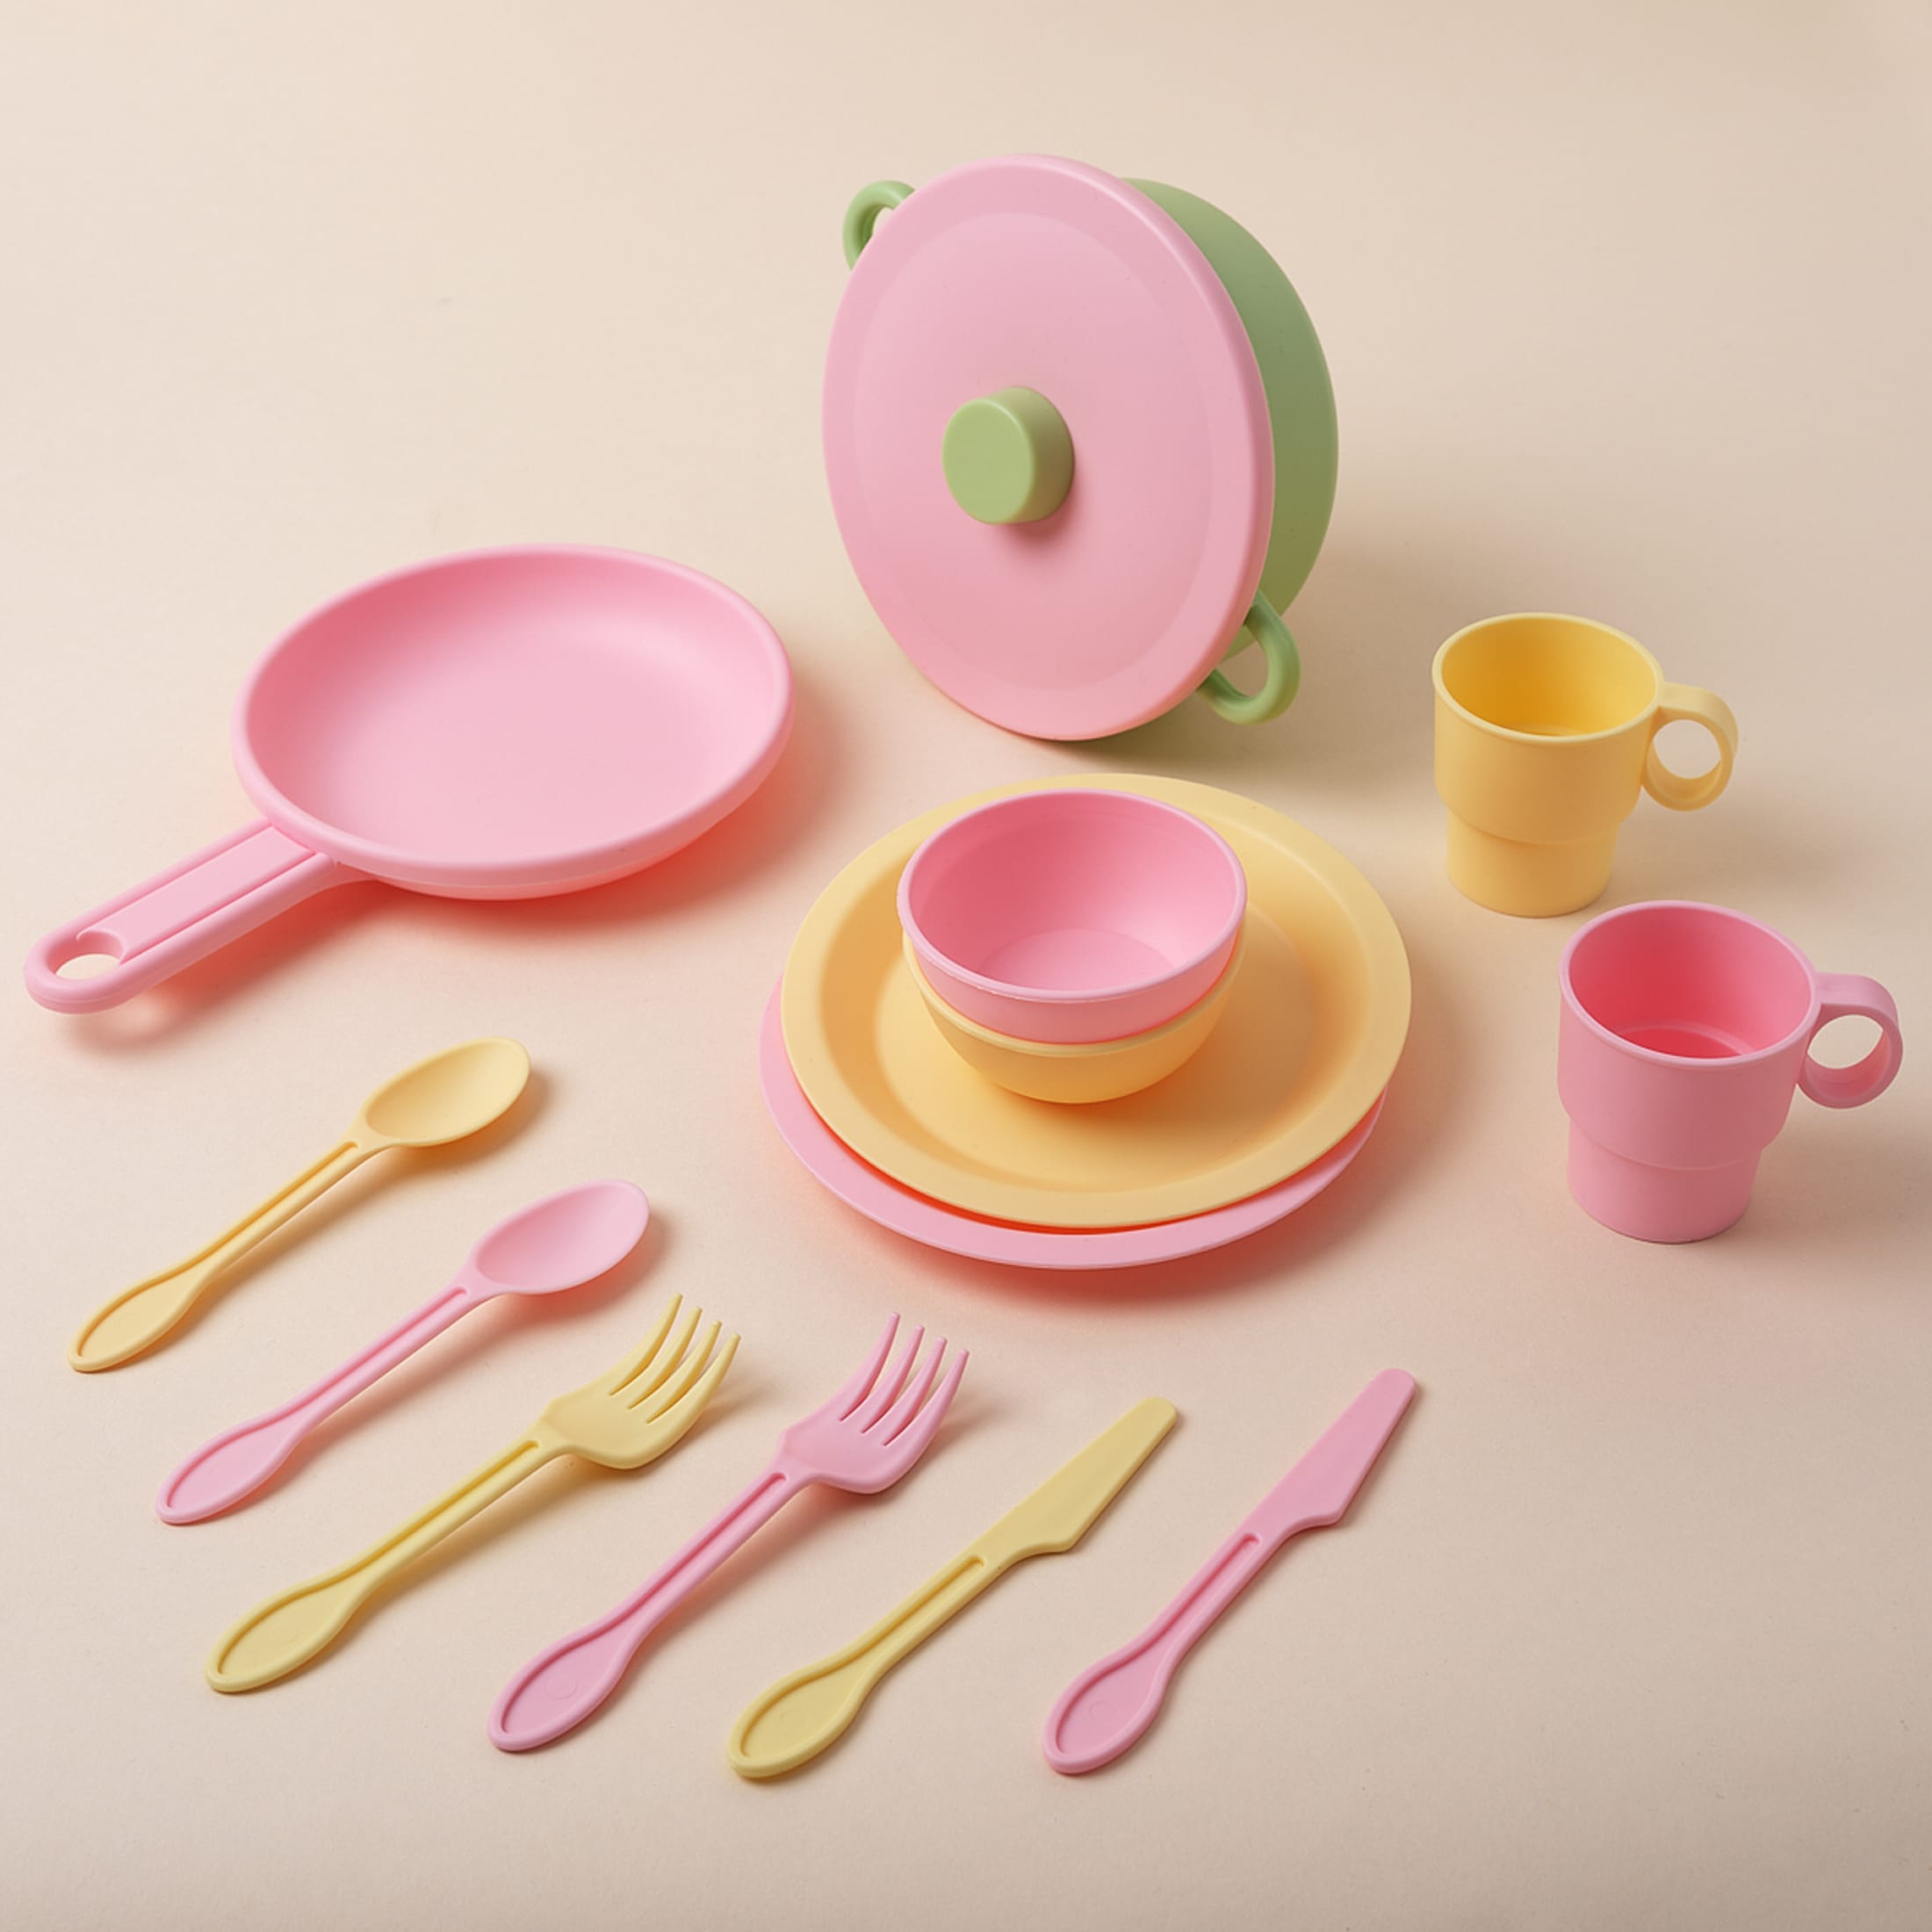 KidKraft 27-Piece Pastel Cookware Set, Plastic Dishes and Utensils for Play Kitchens - image 5 of 5